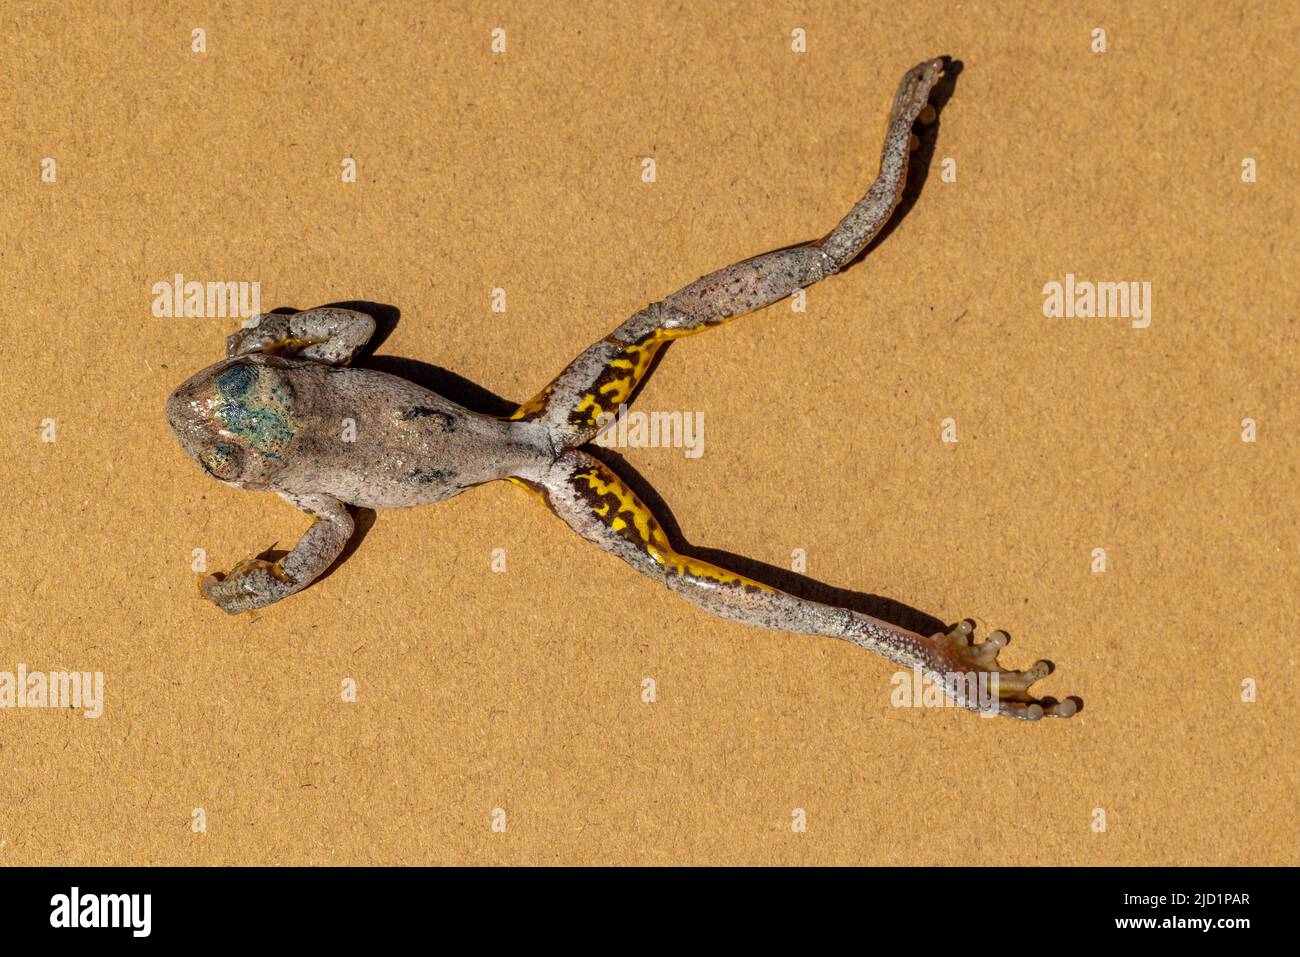 Australian Peron's Tree Frog that has recently died from confirmed Chytrid Fungus disease Stock Photo